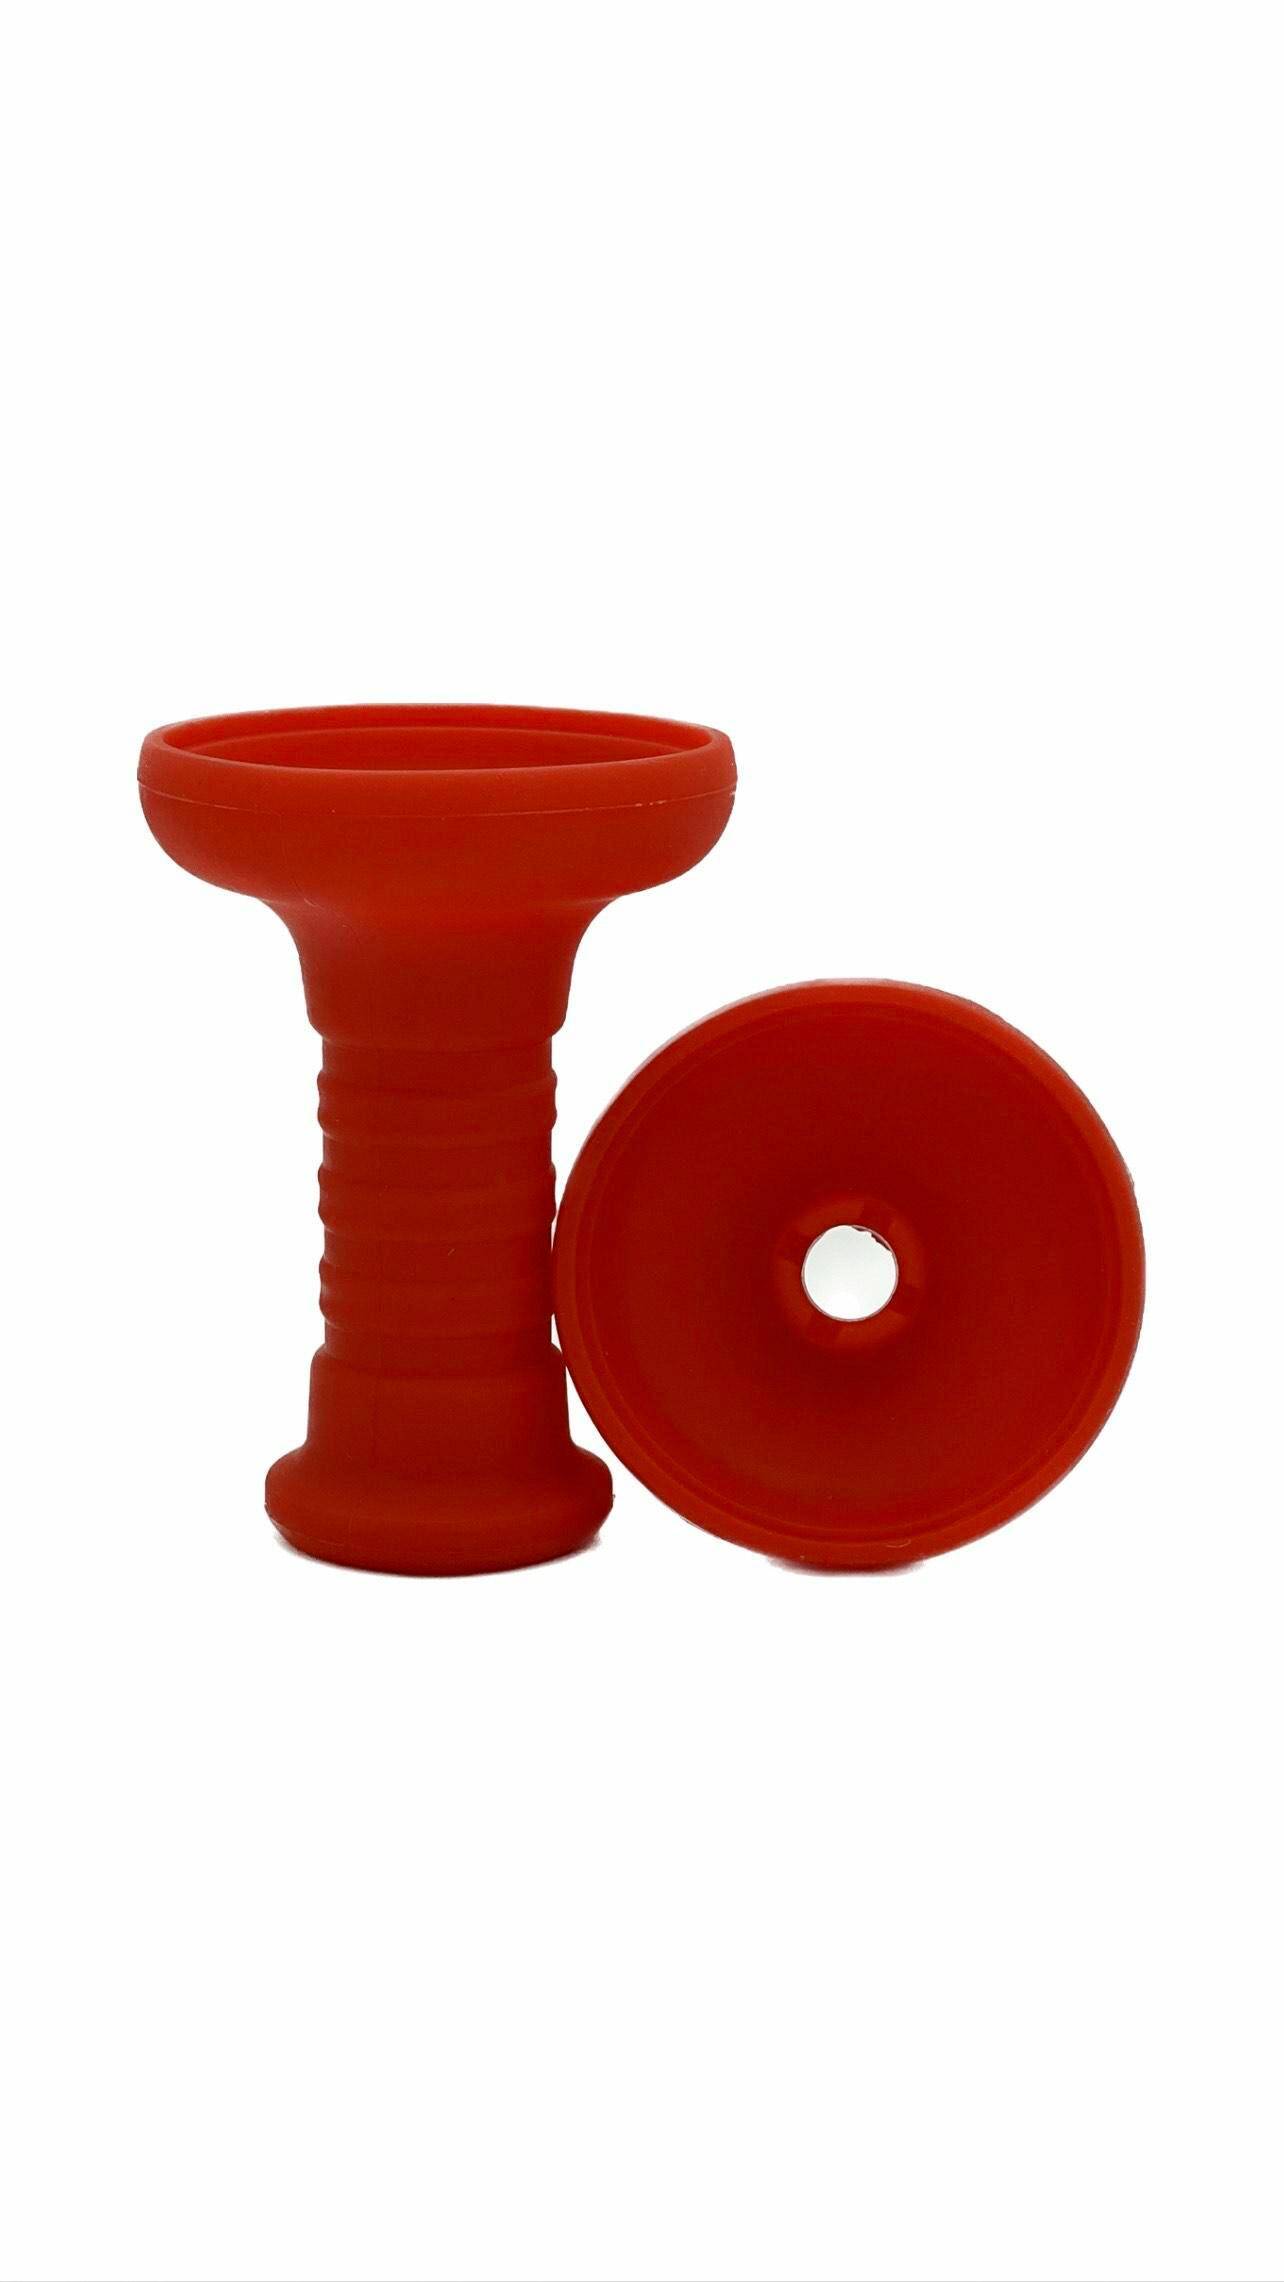 SIlicone bowl A-34 Red Phunnel